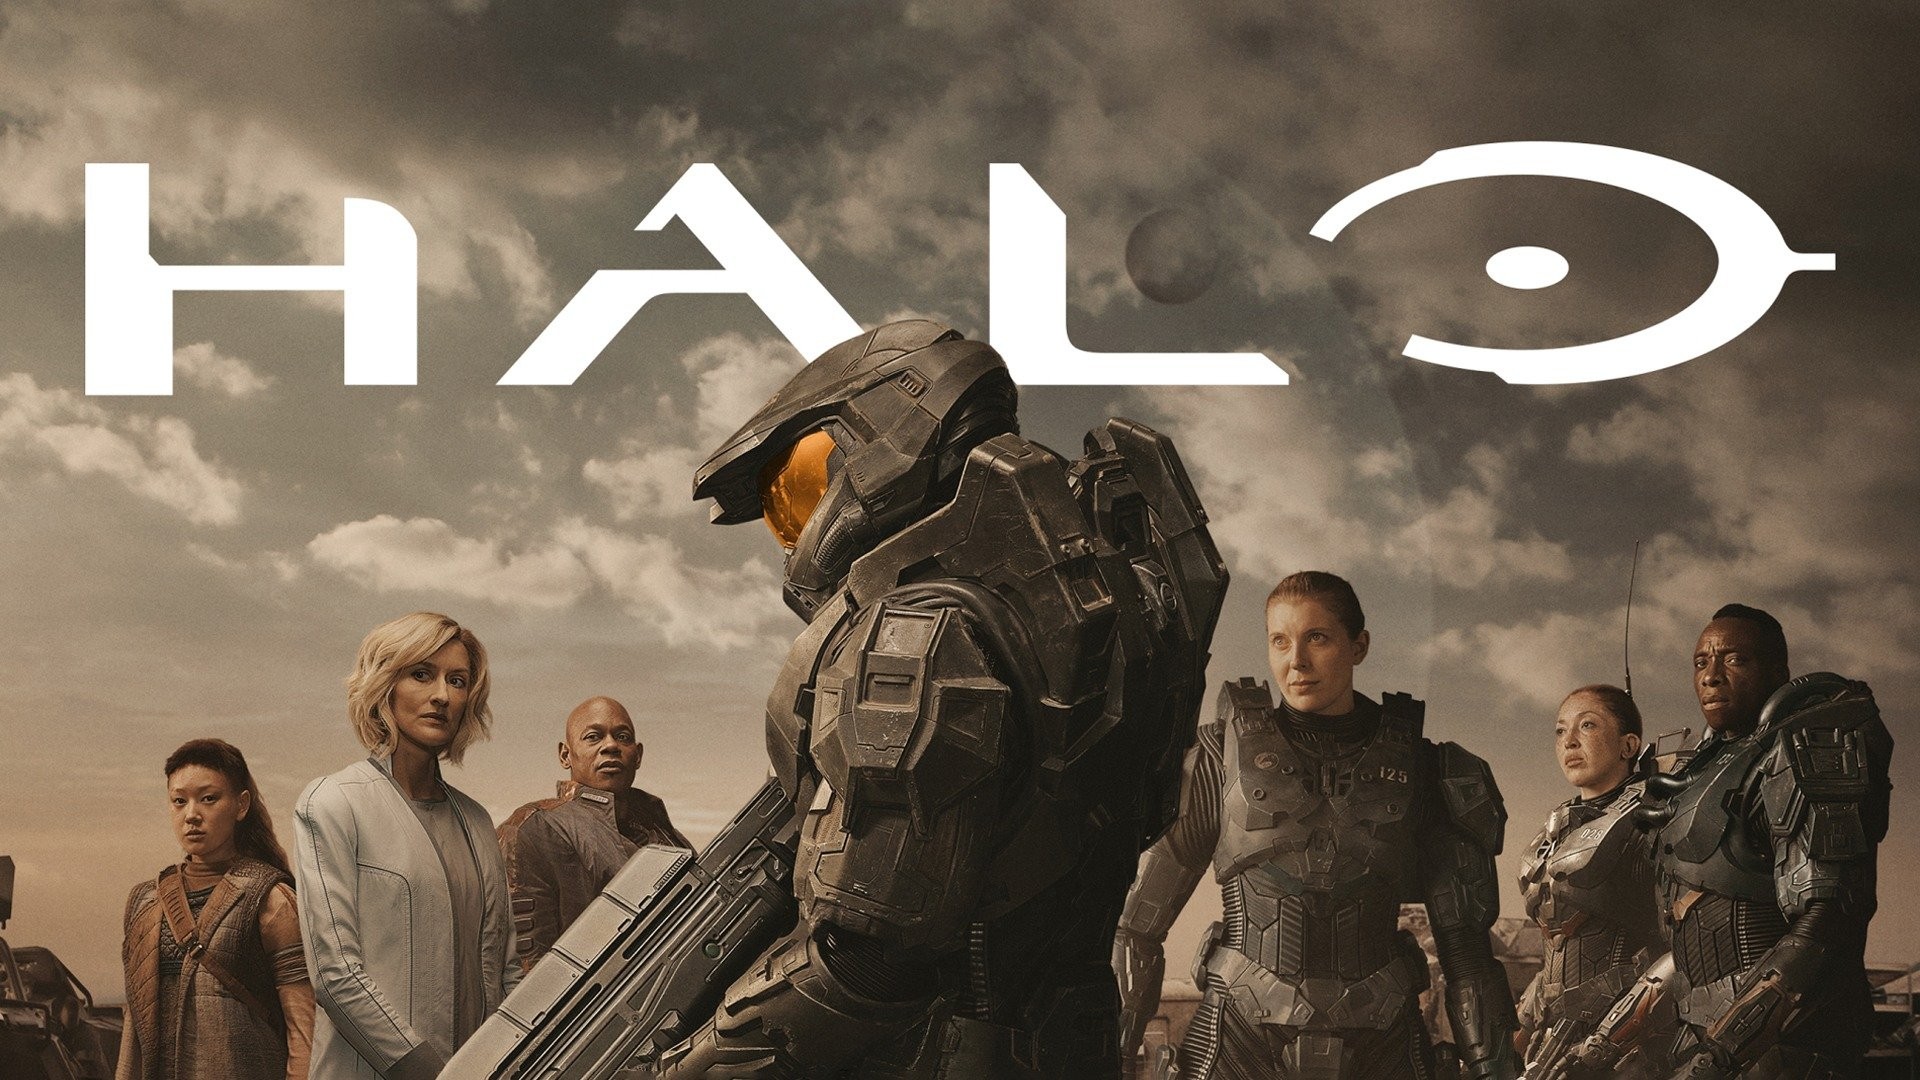 The Halo TV Series is live!